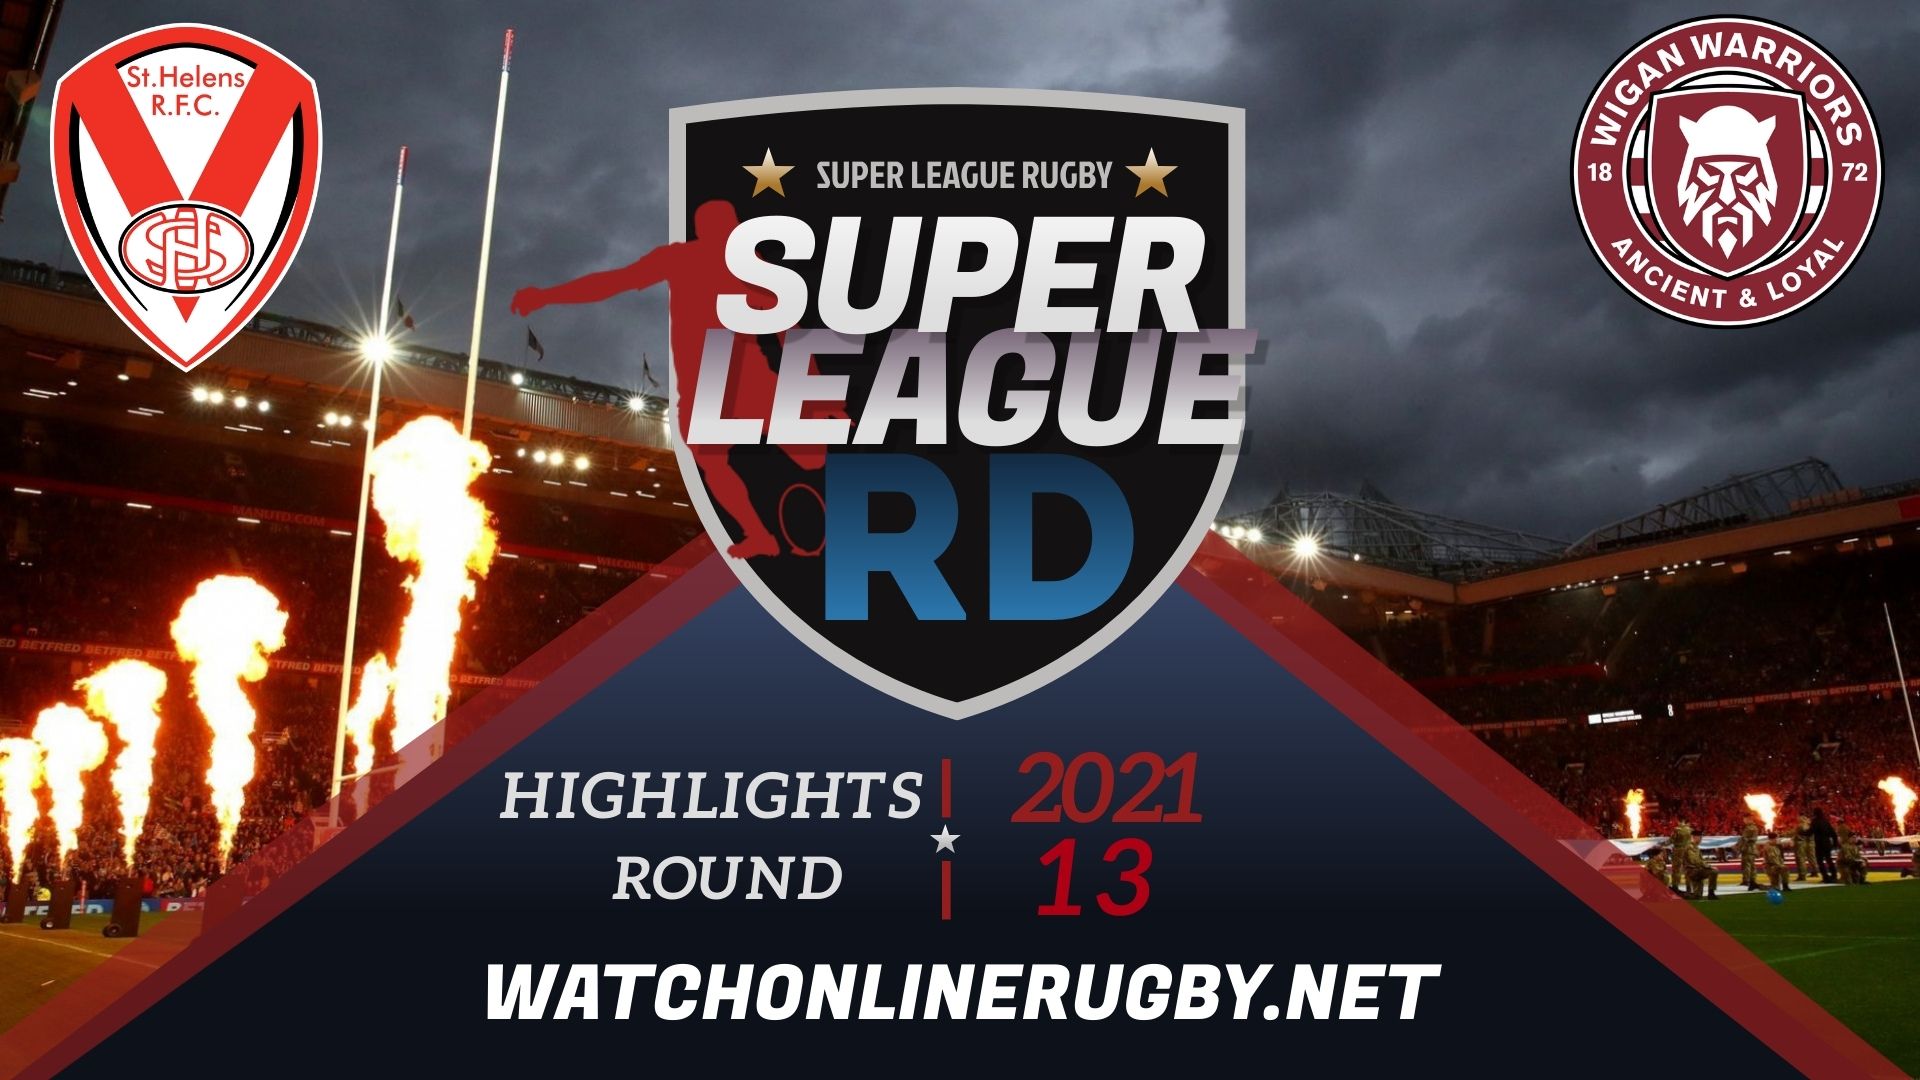 St Helens Vs Wigan Warriors Super League Rugby 2021 RD 13